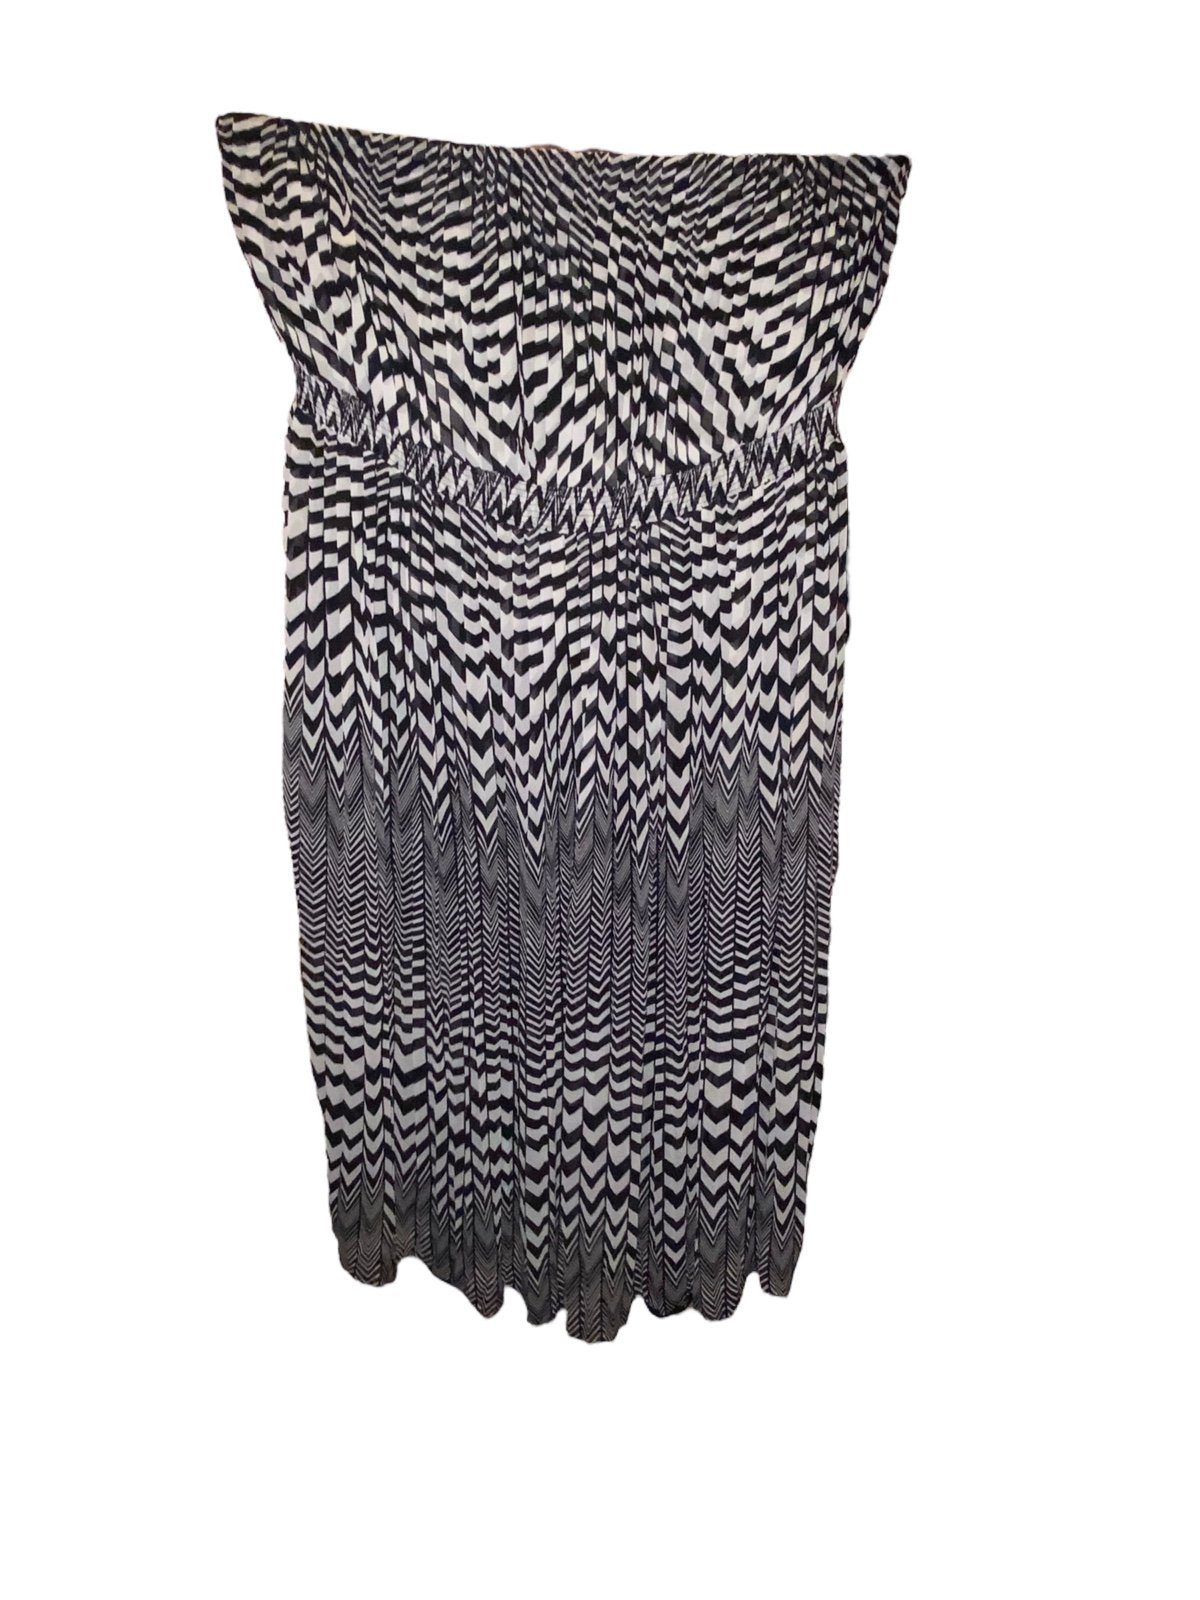 high discount Lane Bryant Black and White Strapless Dress Size 26/28 lbbKHN4EO all for you